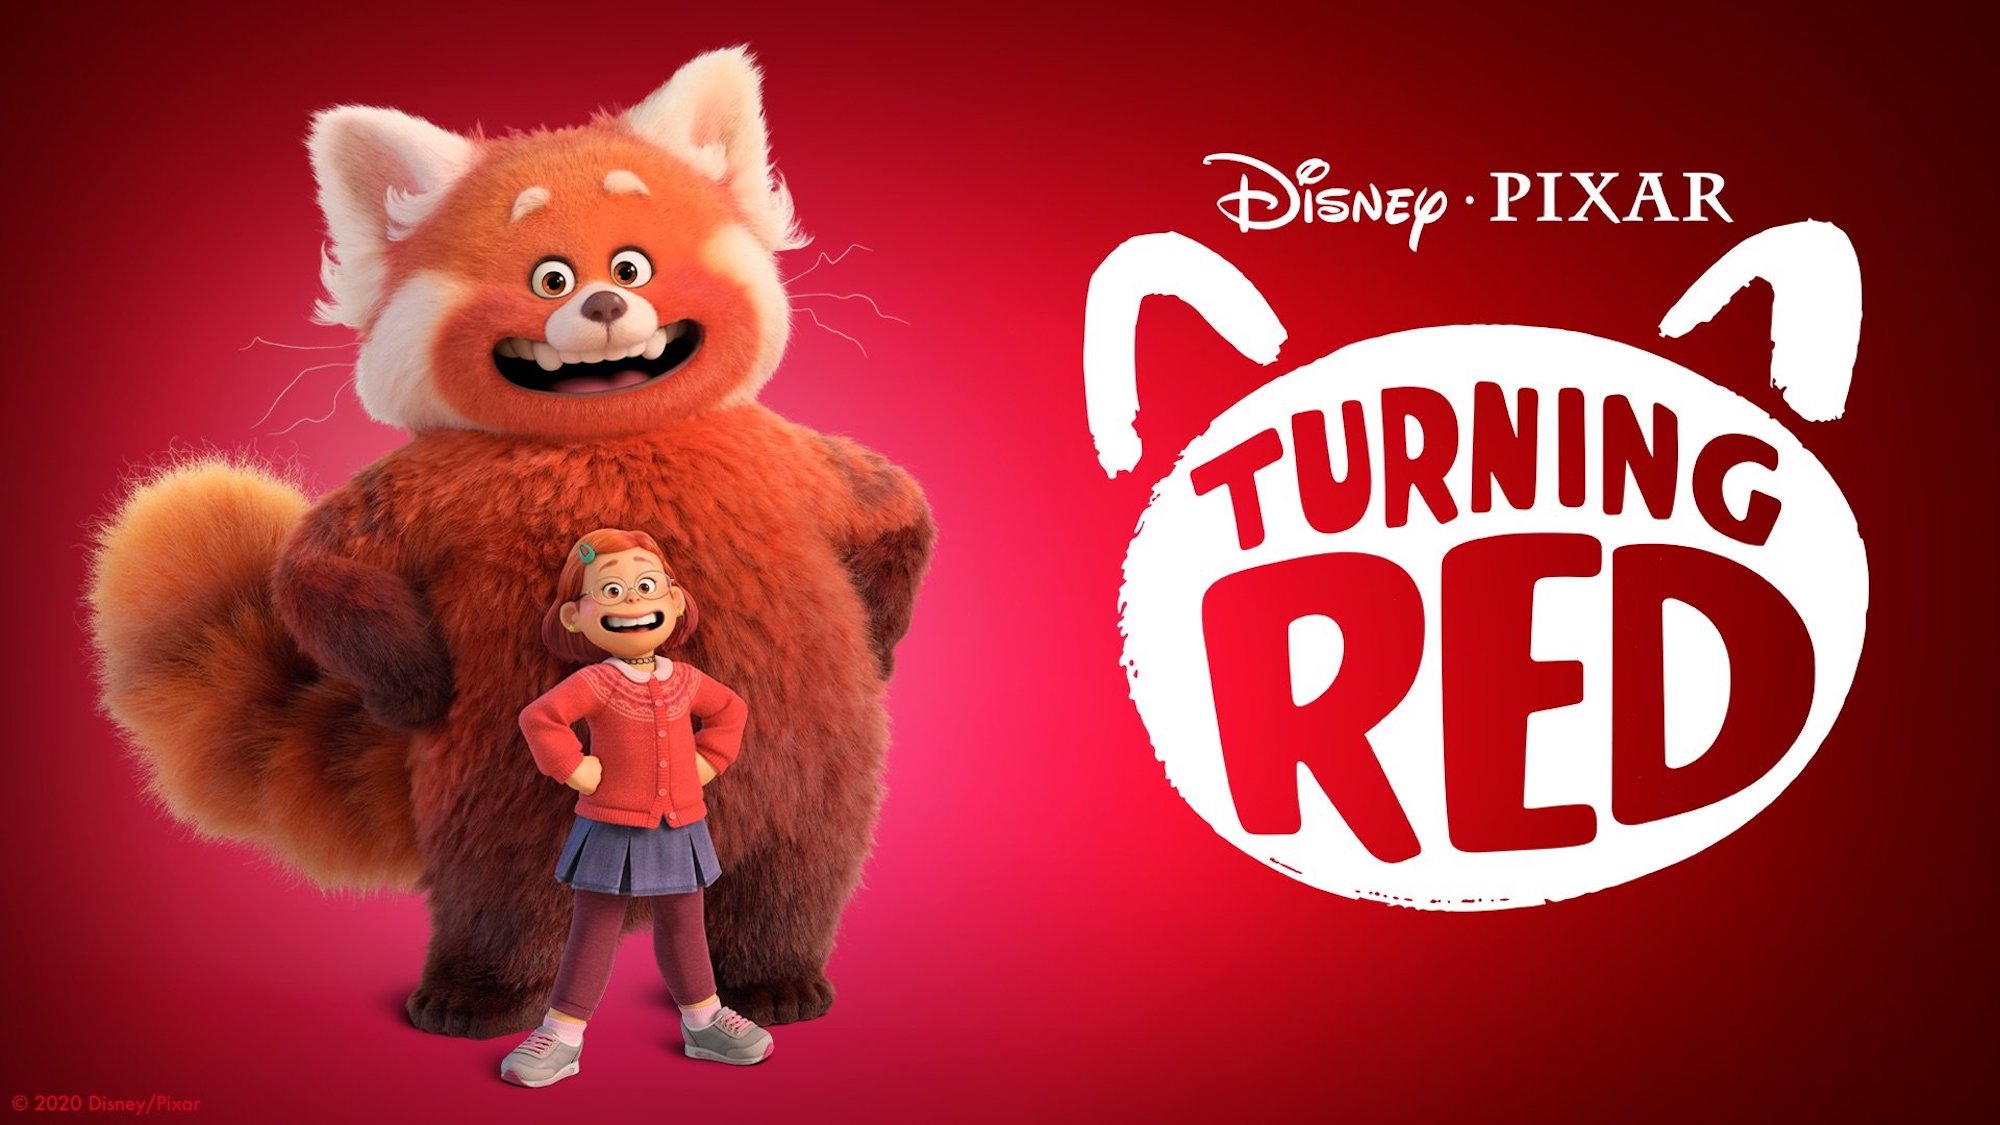 ‘Turning Red’: How can you watch Pixar’s new movie for free online?